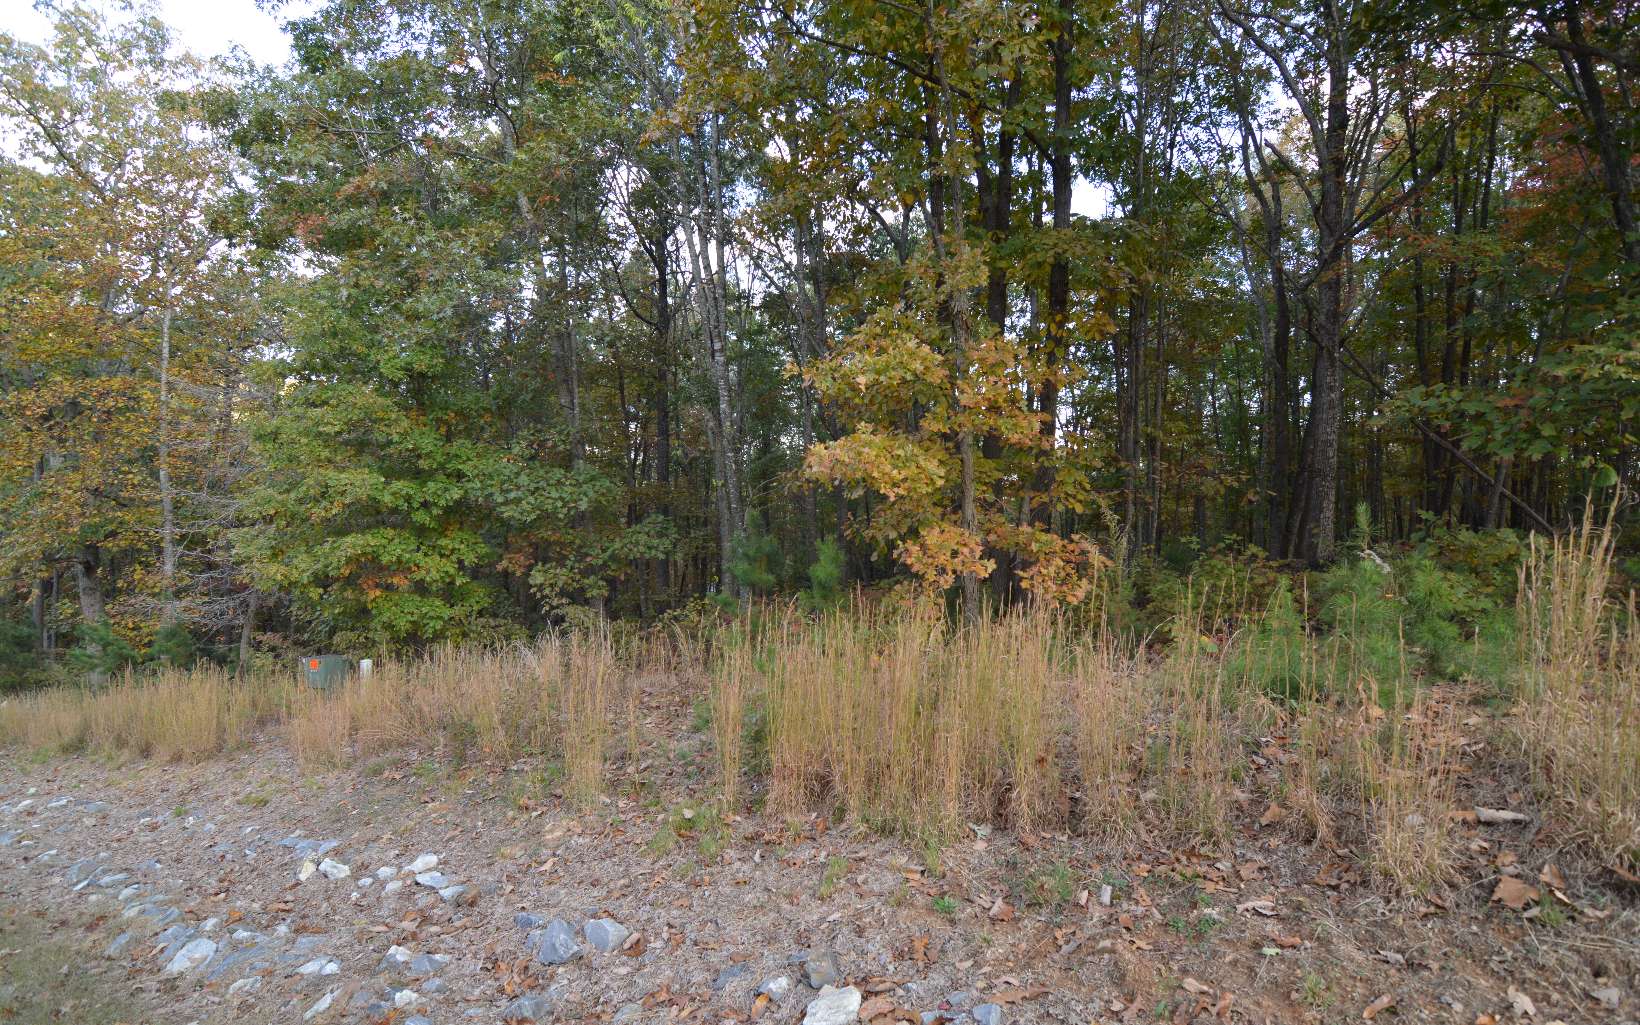 Beautiful gentle wooded home site. Public water, power, and telephone all available, paved roads and professionally landscaped entrance. Private, yet close to town and the Hwy 325 boat ramp to Lake Nottely. Come check out this fabulous subdivision.